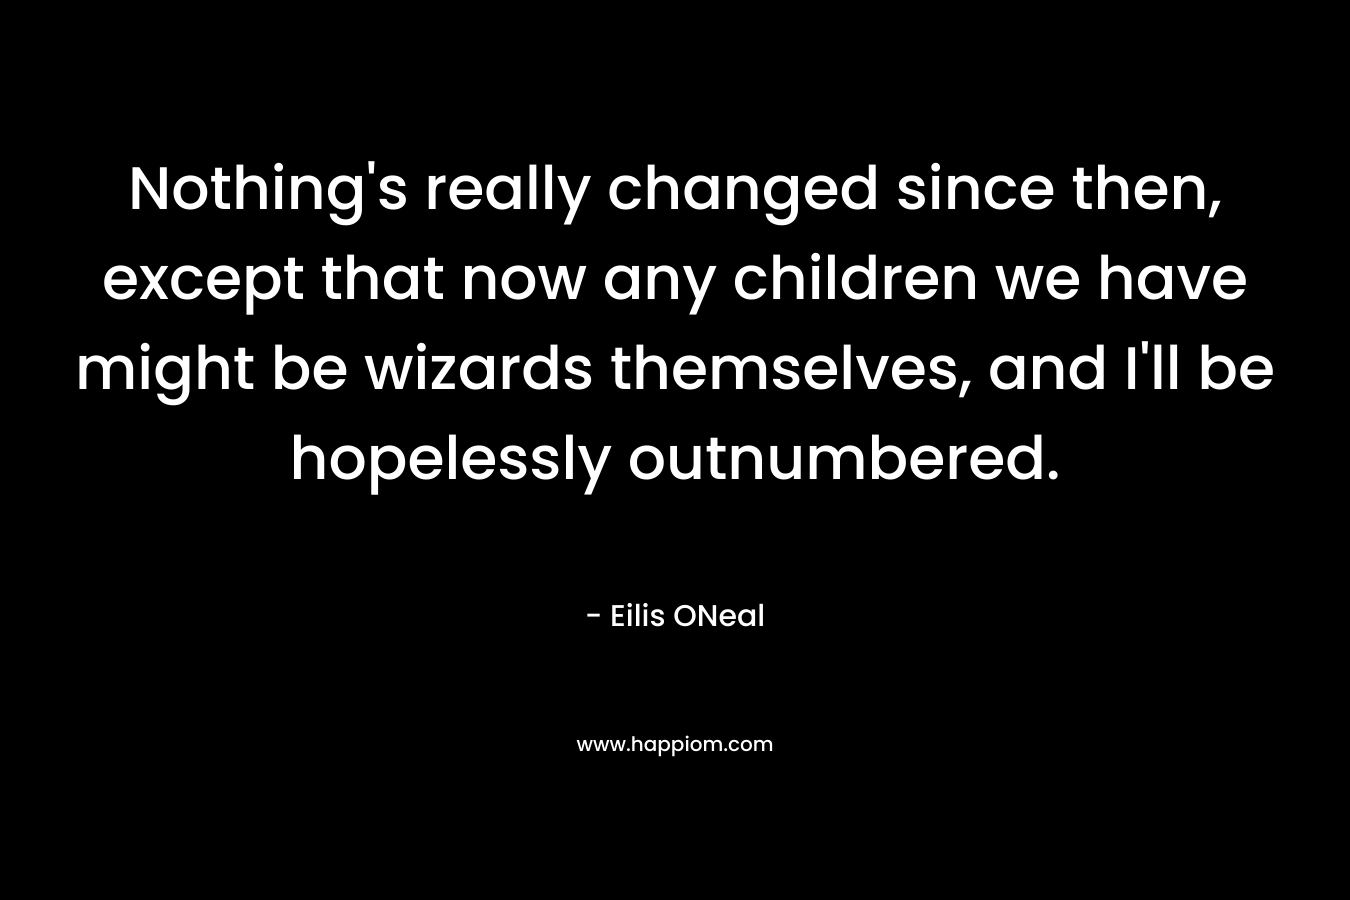 Nothing’s really changed since then, except that now any children we have might be wizards themselves, and I’ll be hopelessly outnumbered. – Eilis ONeal